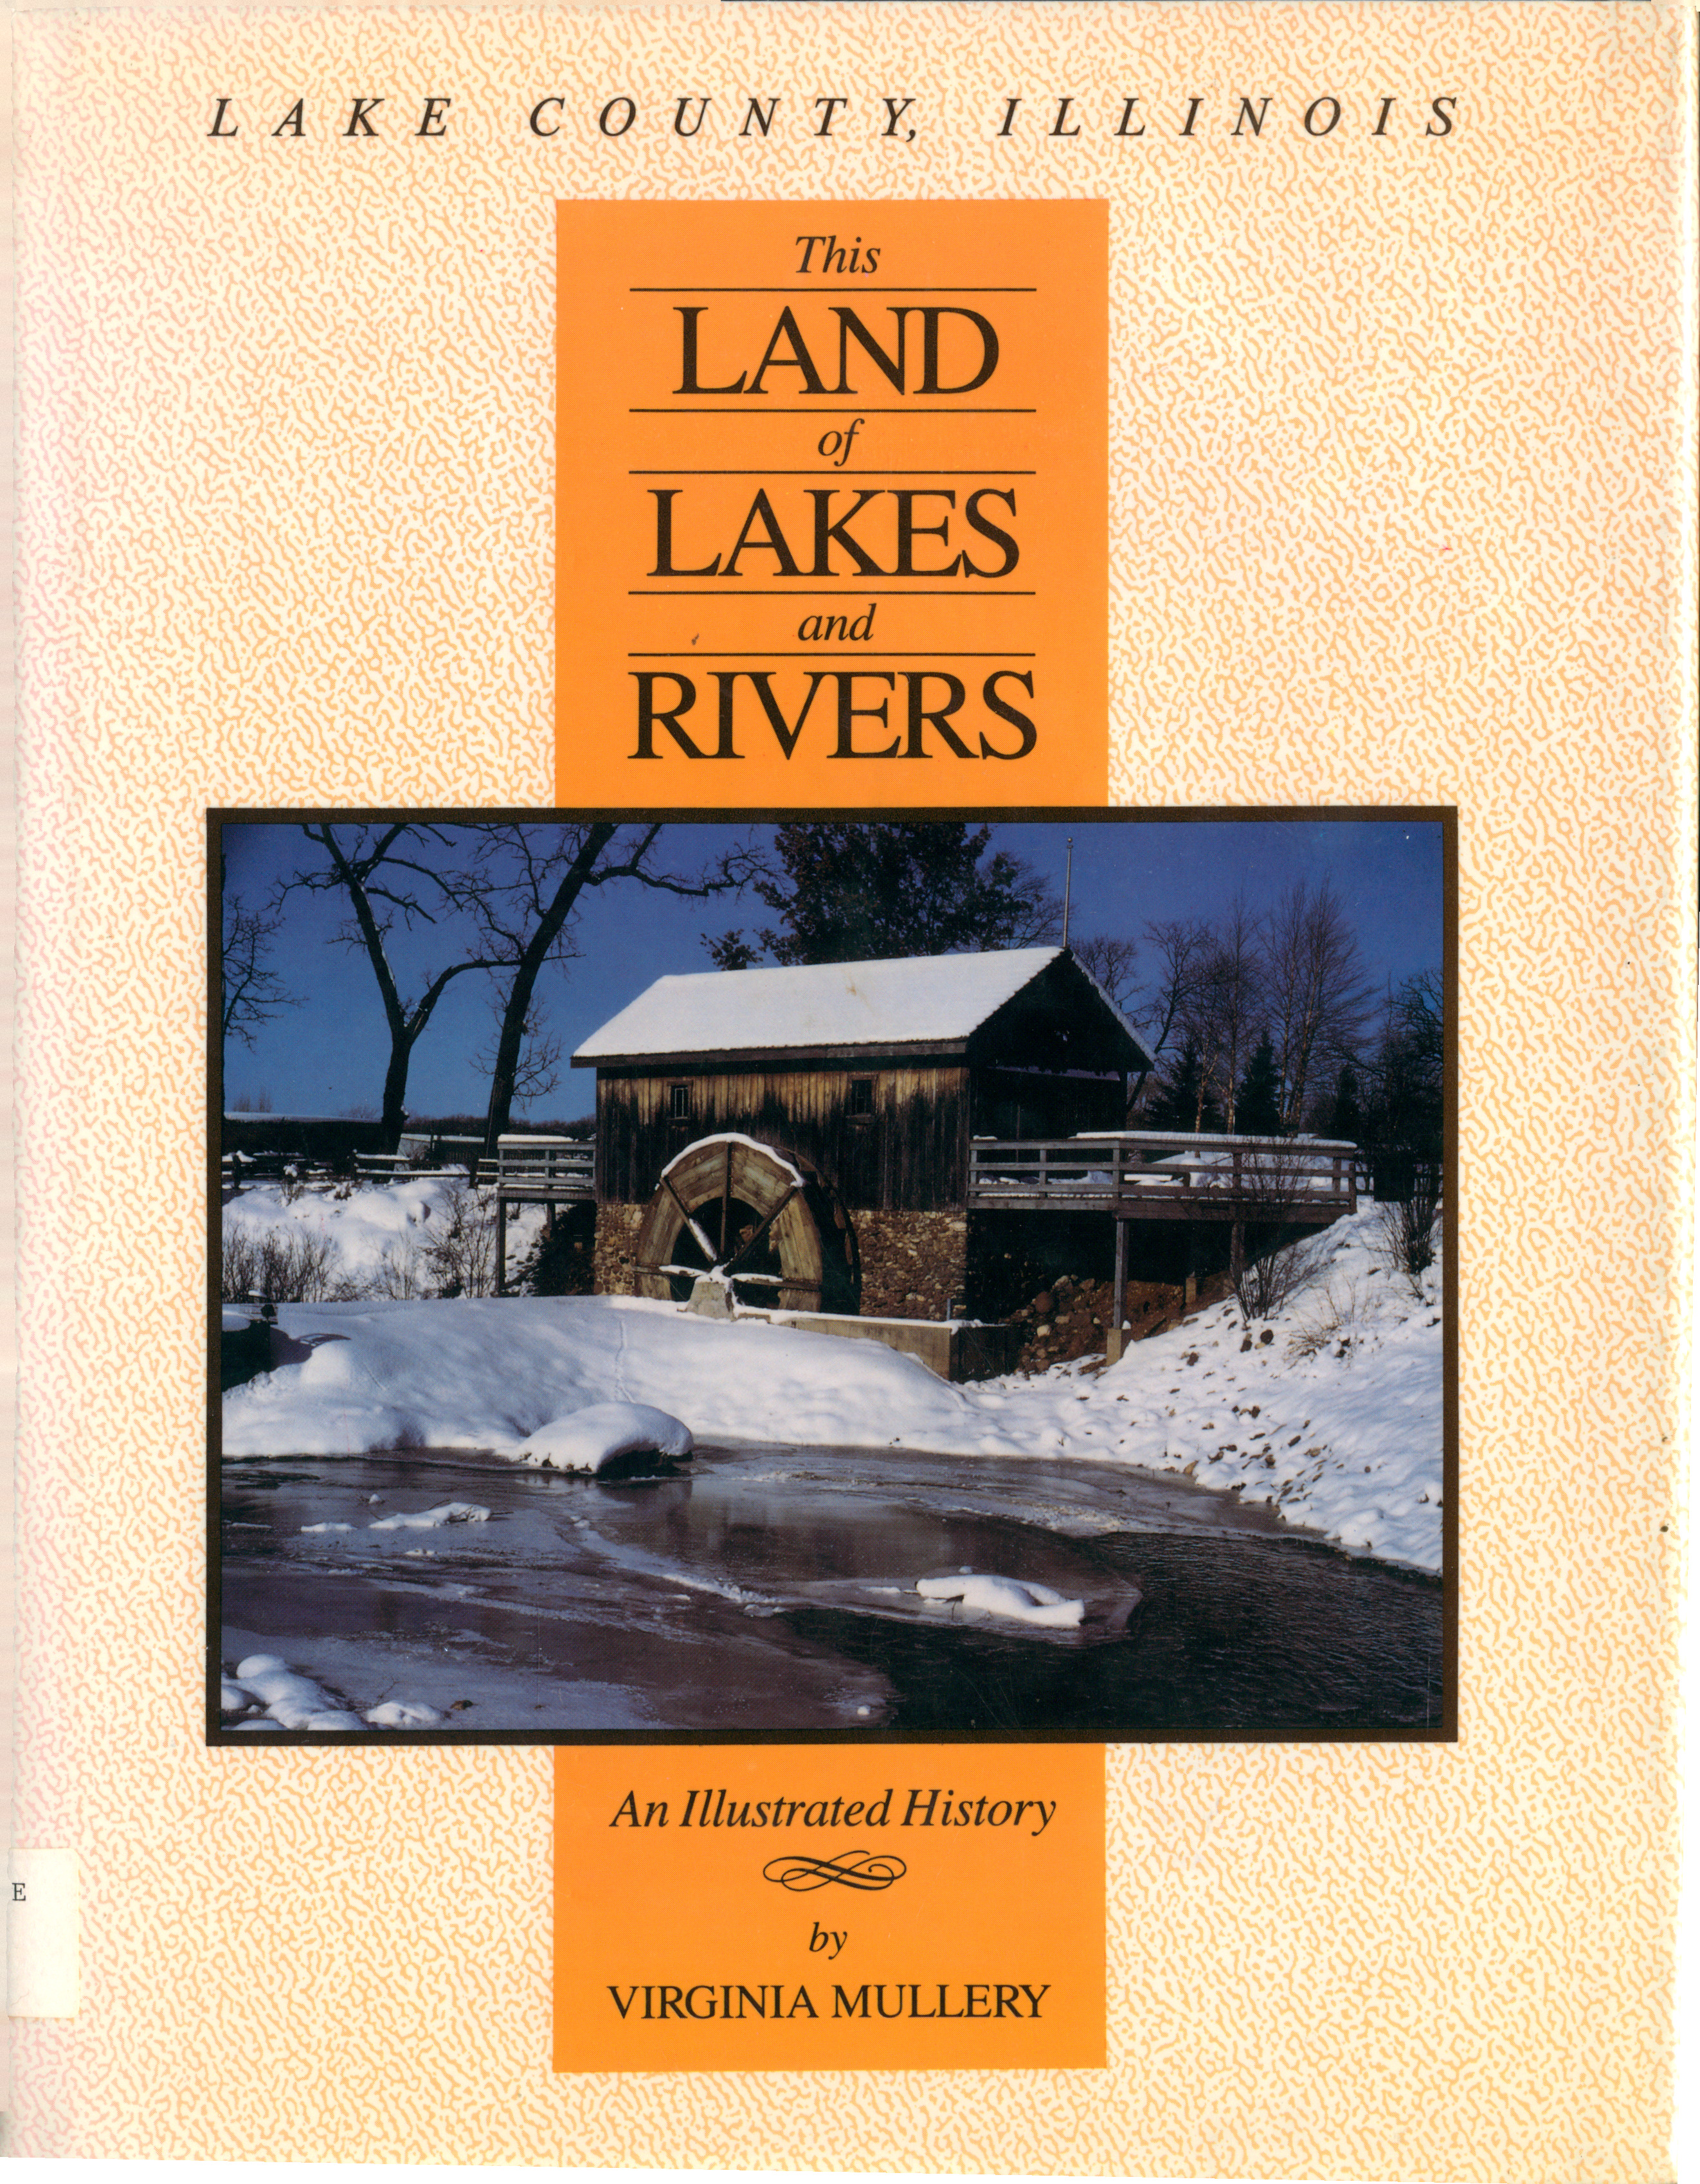 Image for "Lake County, Illinois: This Land of Lakes and Rivers"